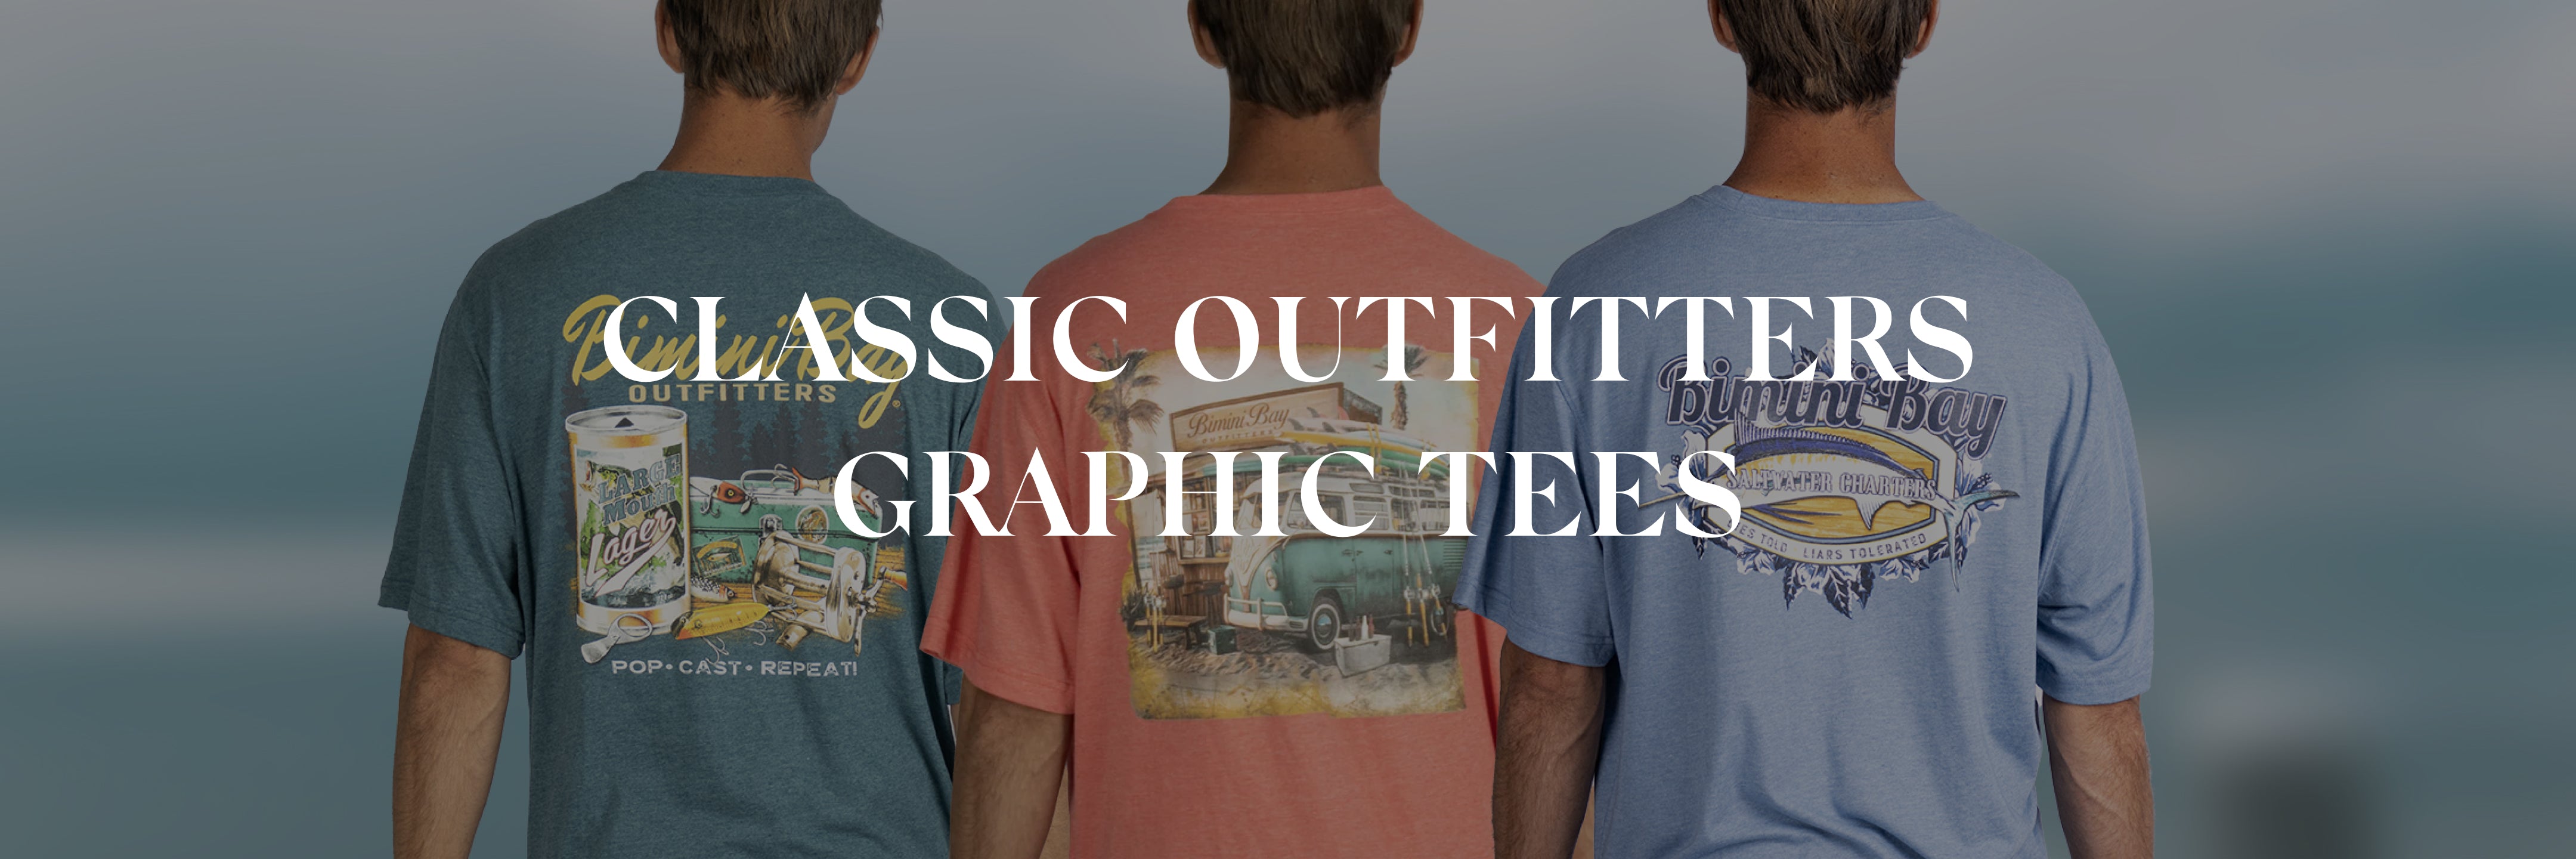 Classic Outfitters Graphic Tees